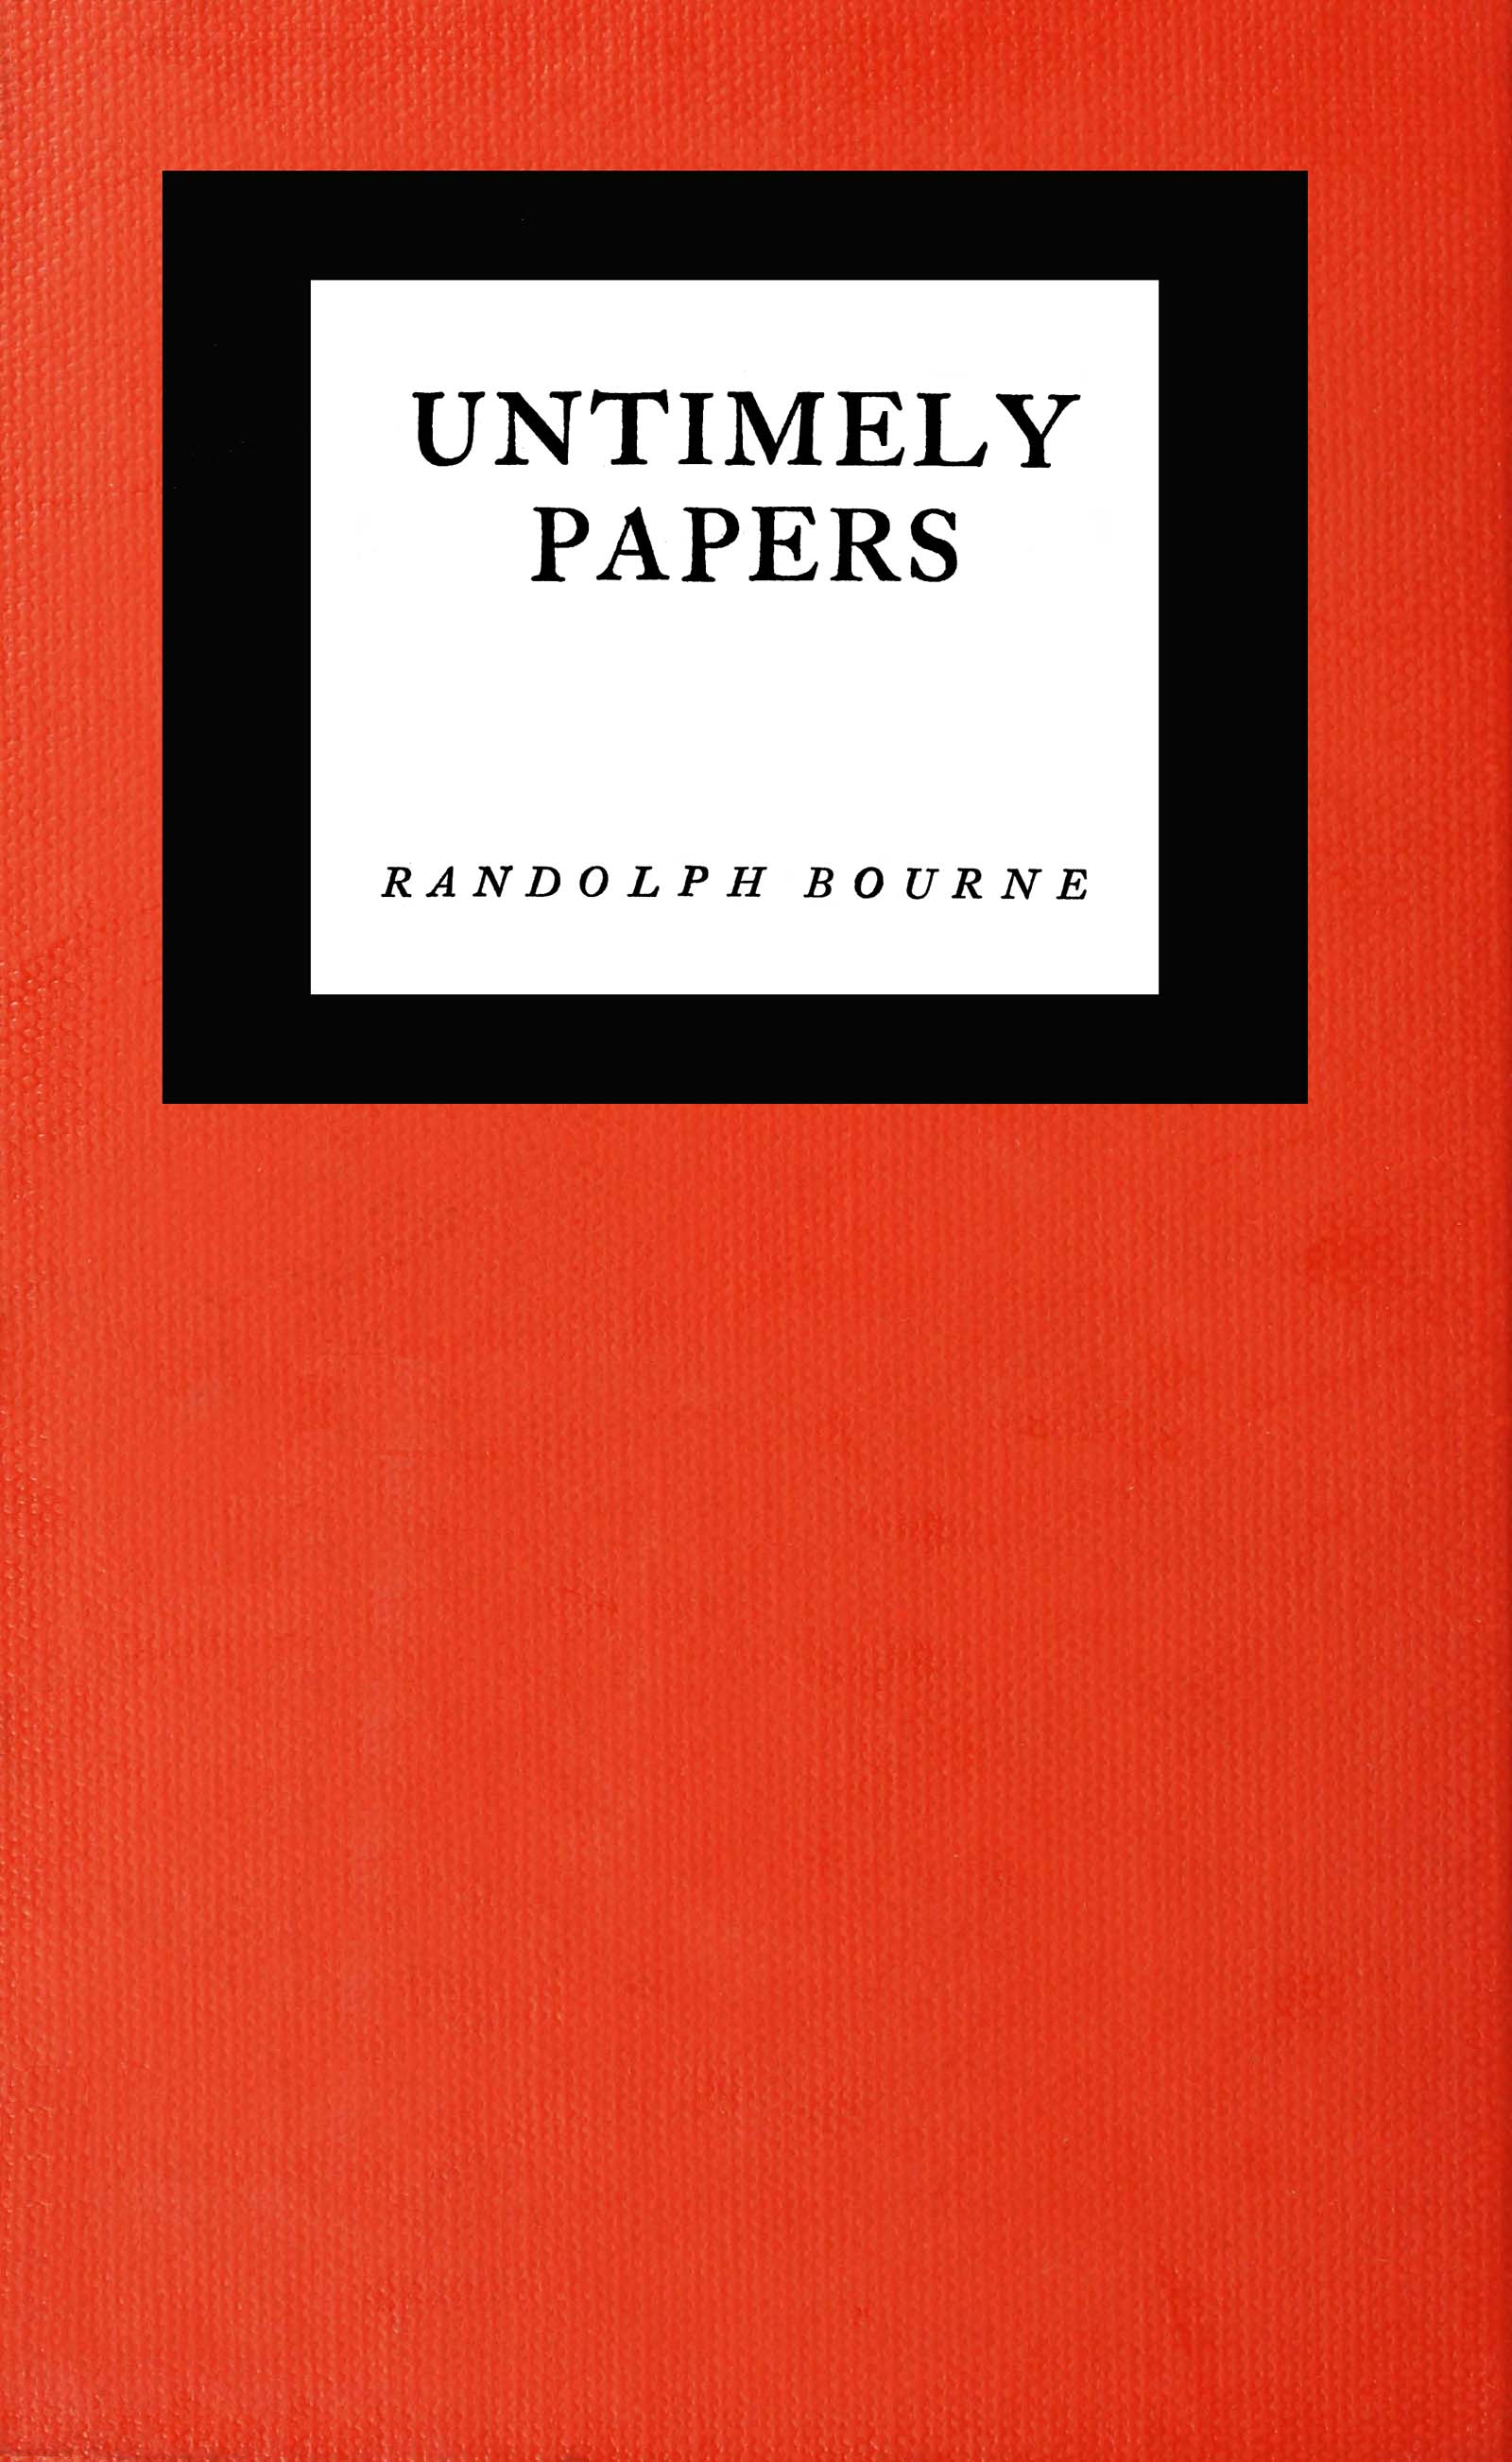 Untimely papers, by Randolph Bourne—A Project Gutenberg eBook